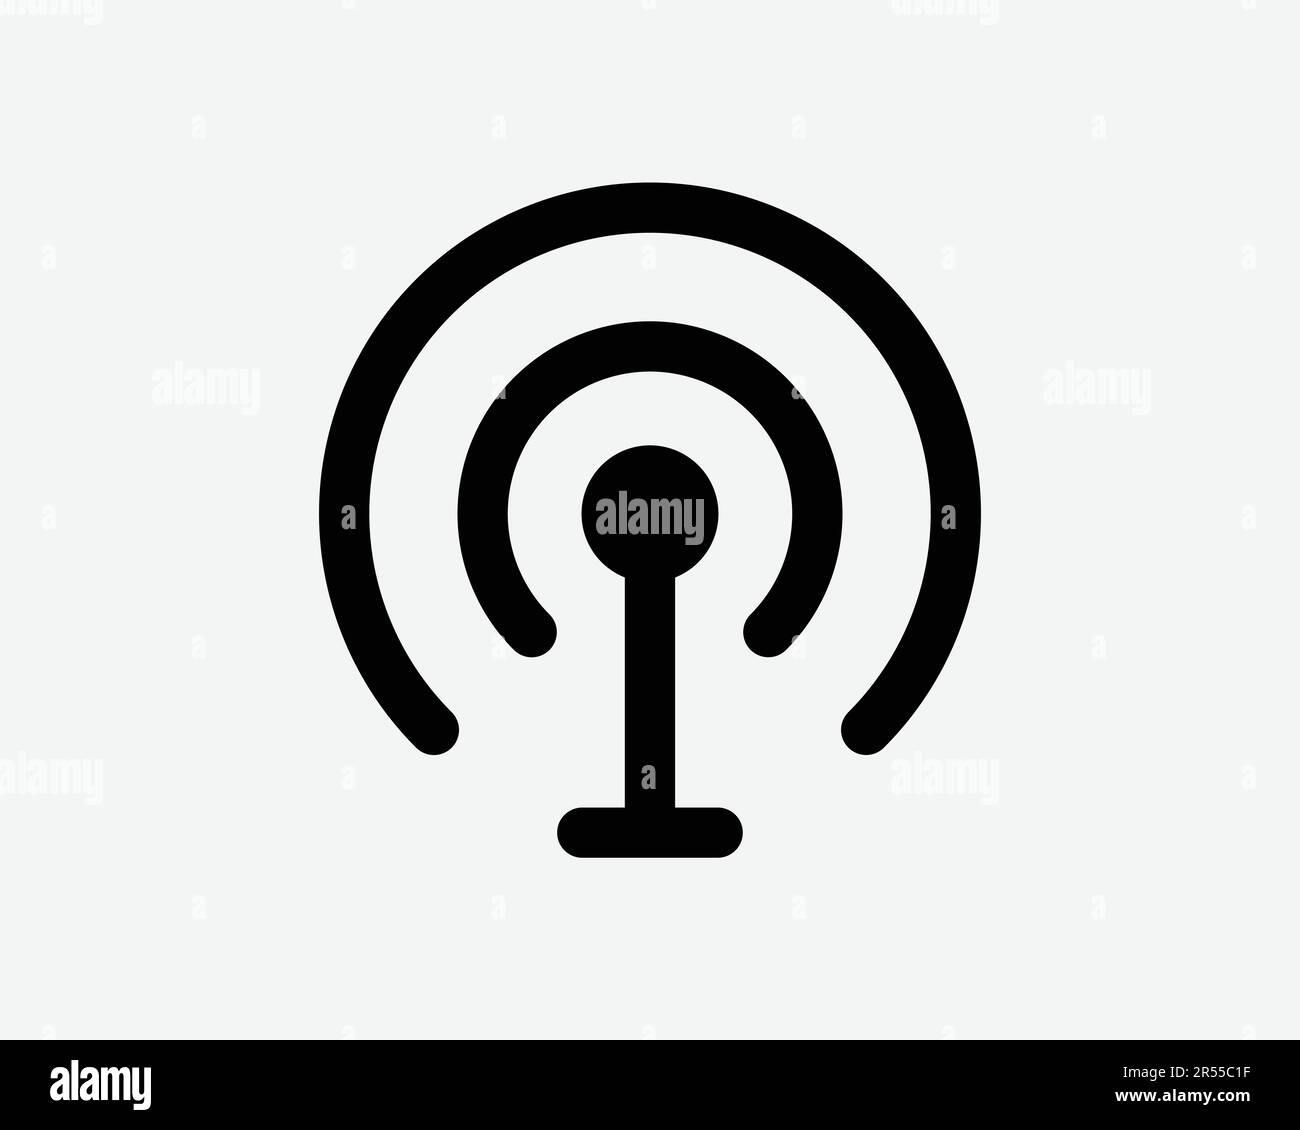 Broadcast Network Icon. Radio Wireless Communication Signal Wave Connection On Air Sign Symbol Black Artwork Graphic Illustration Clipart EPS Vector Stock Vector